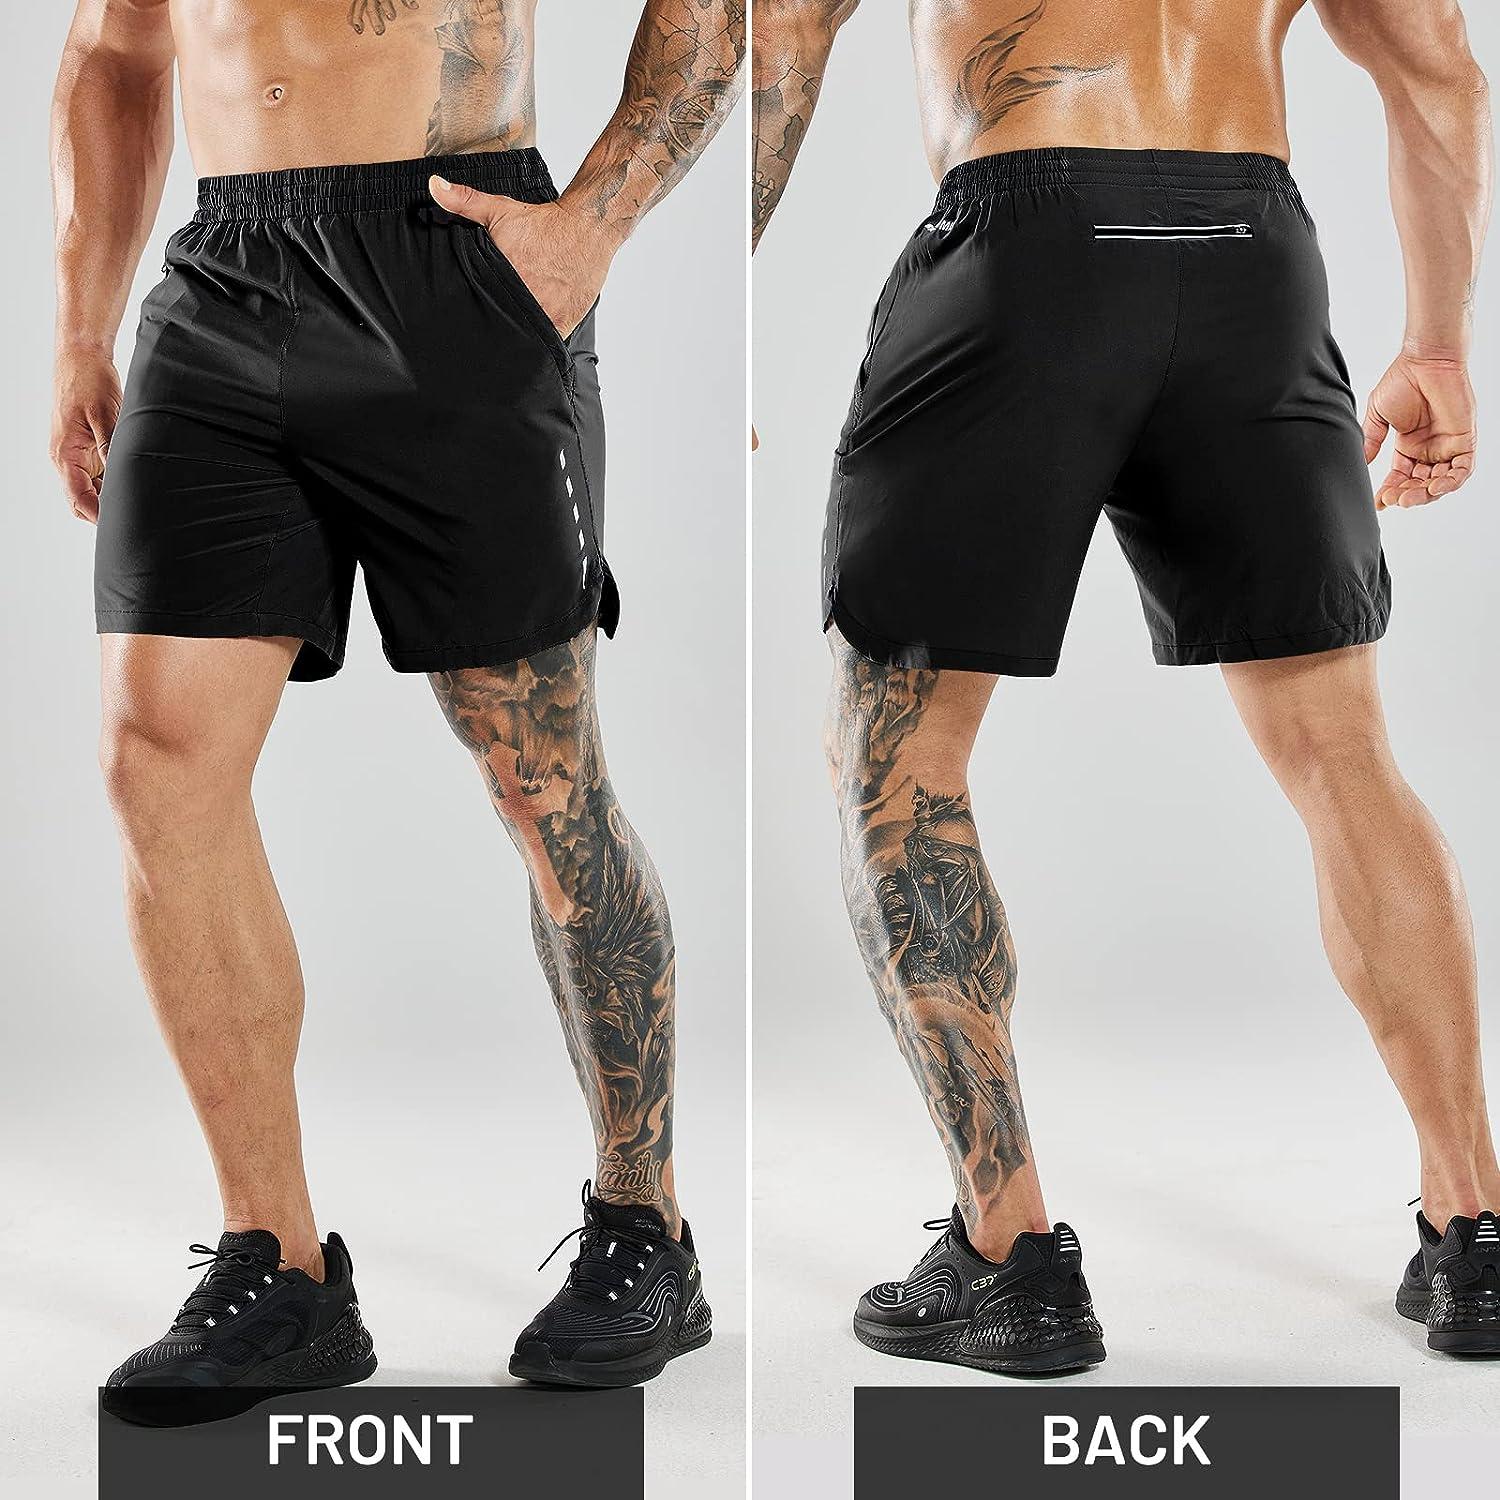  MIER Men's Quick Dry Running Shorts Comfortable Gym